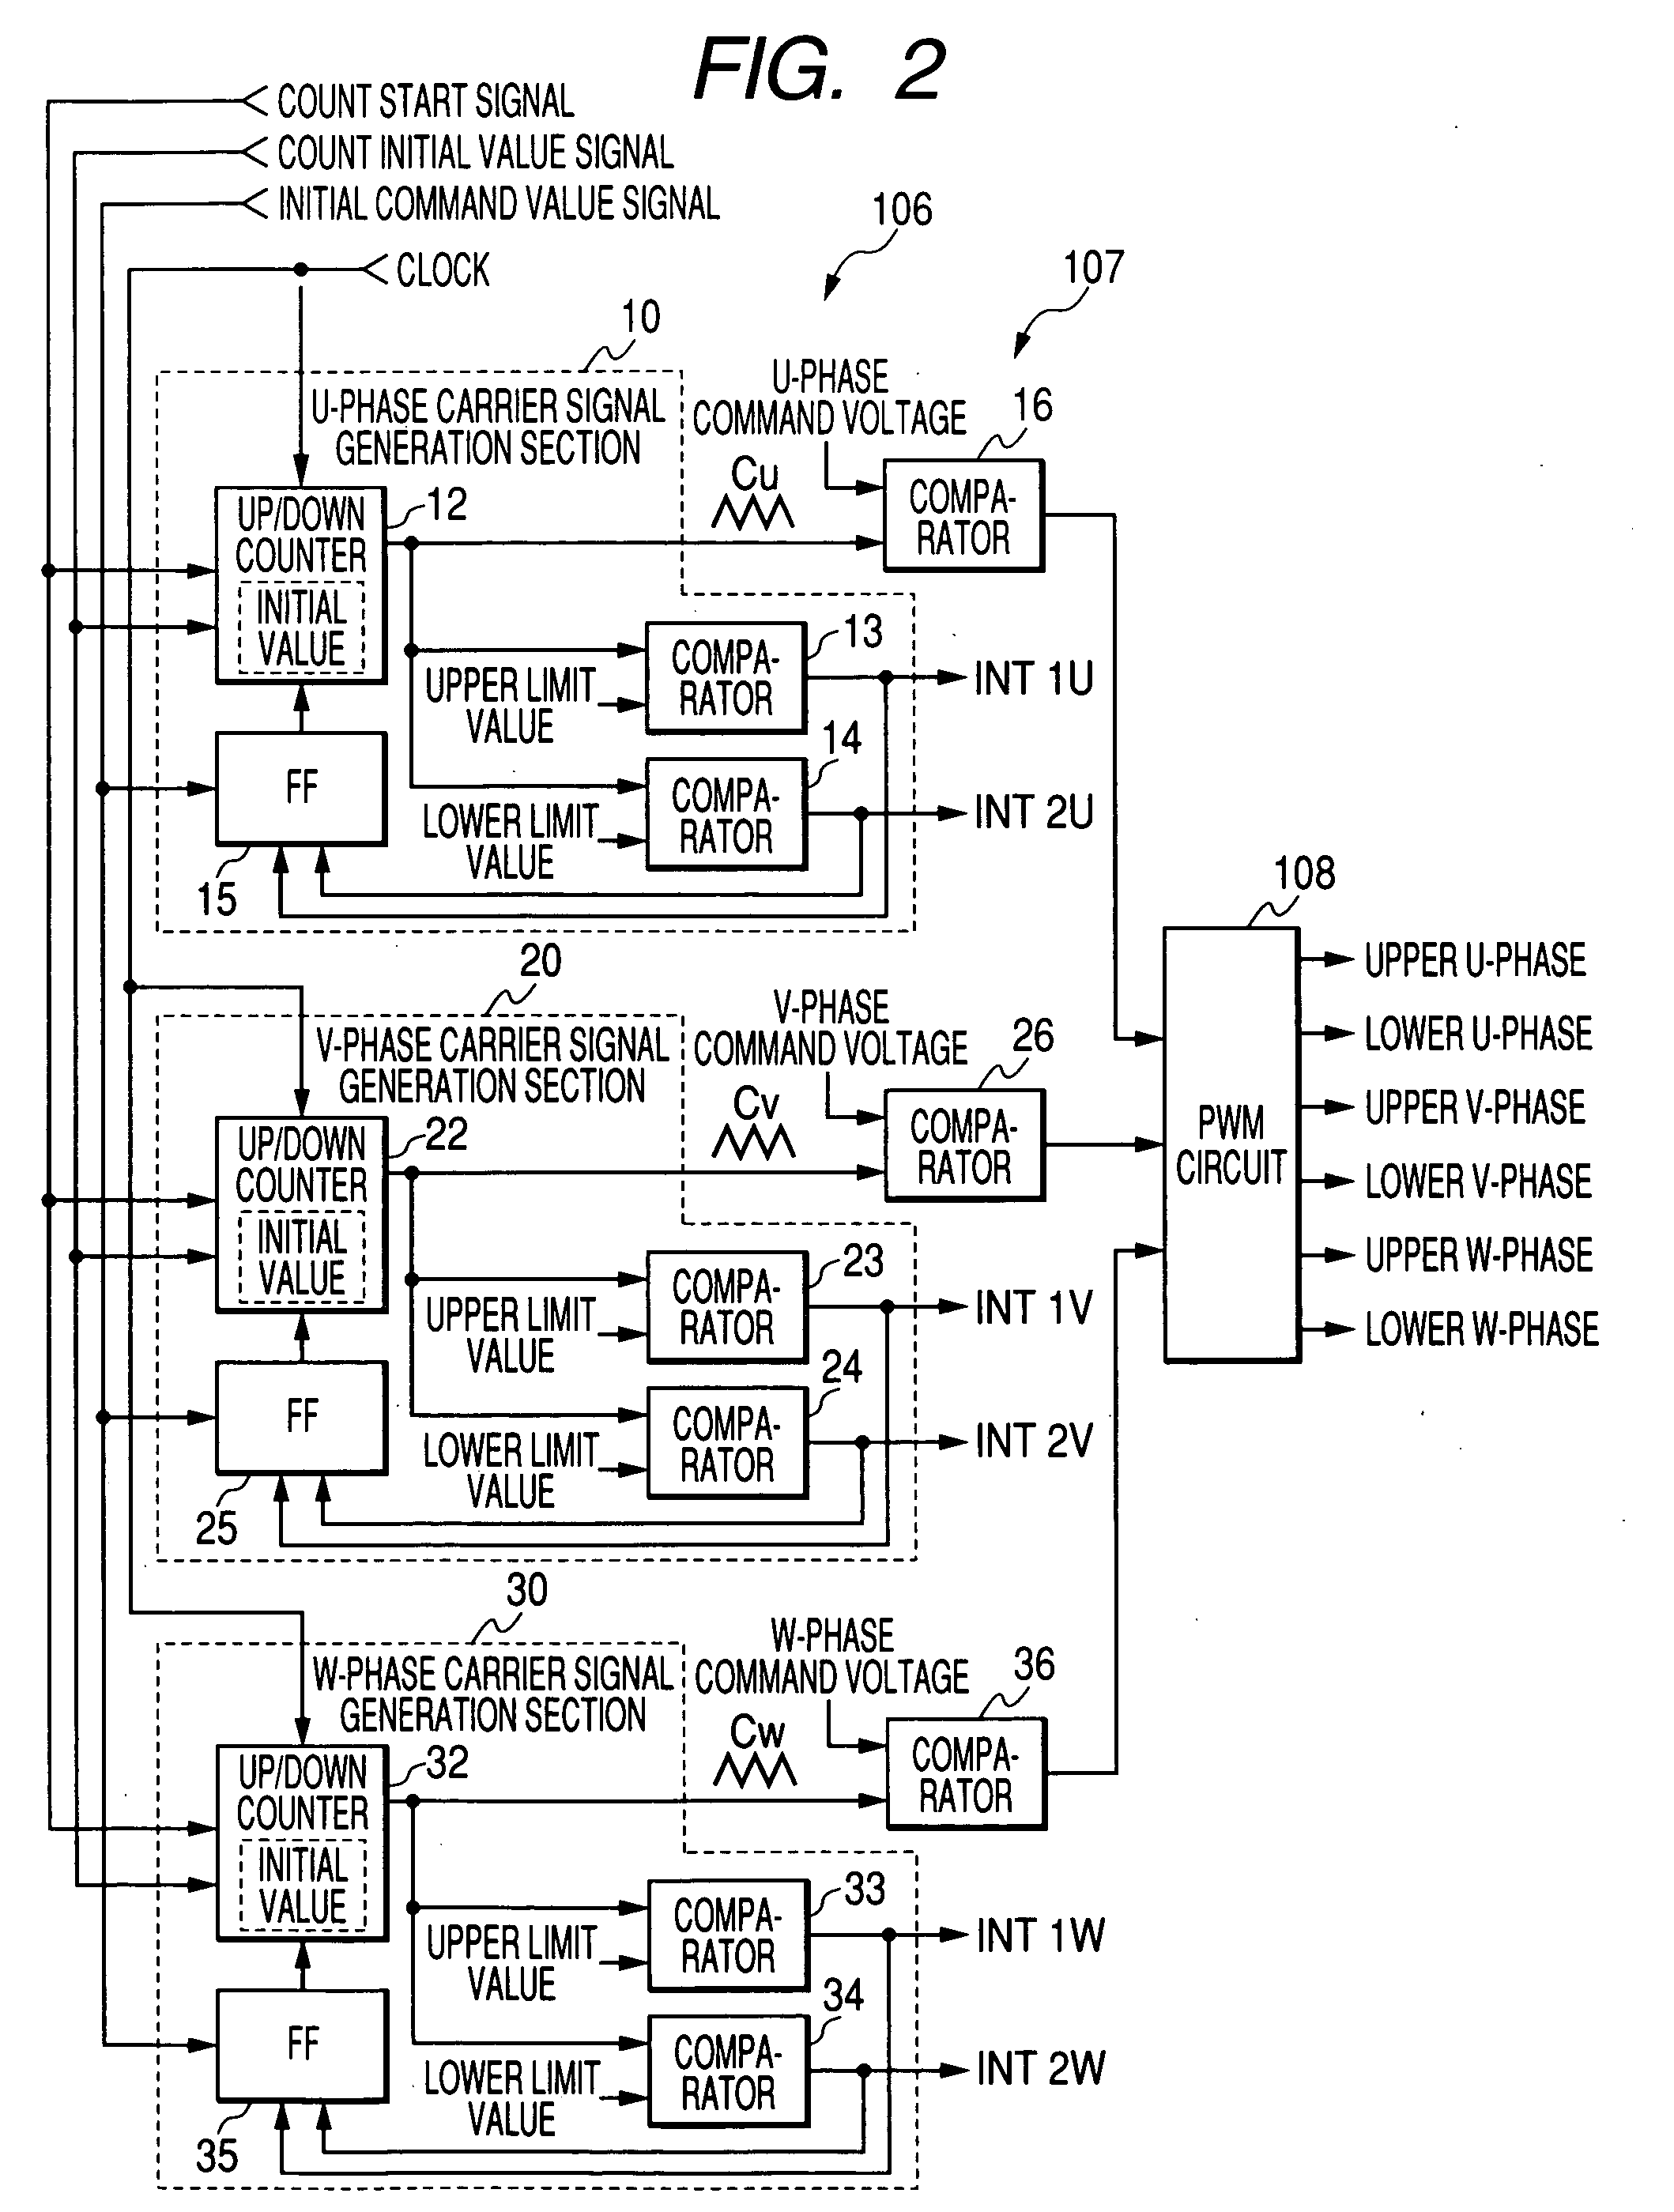 Multi-phase carrier signal generator and multi-phase carrier signal generation method